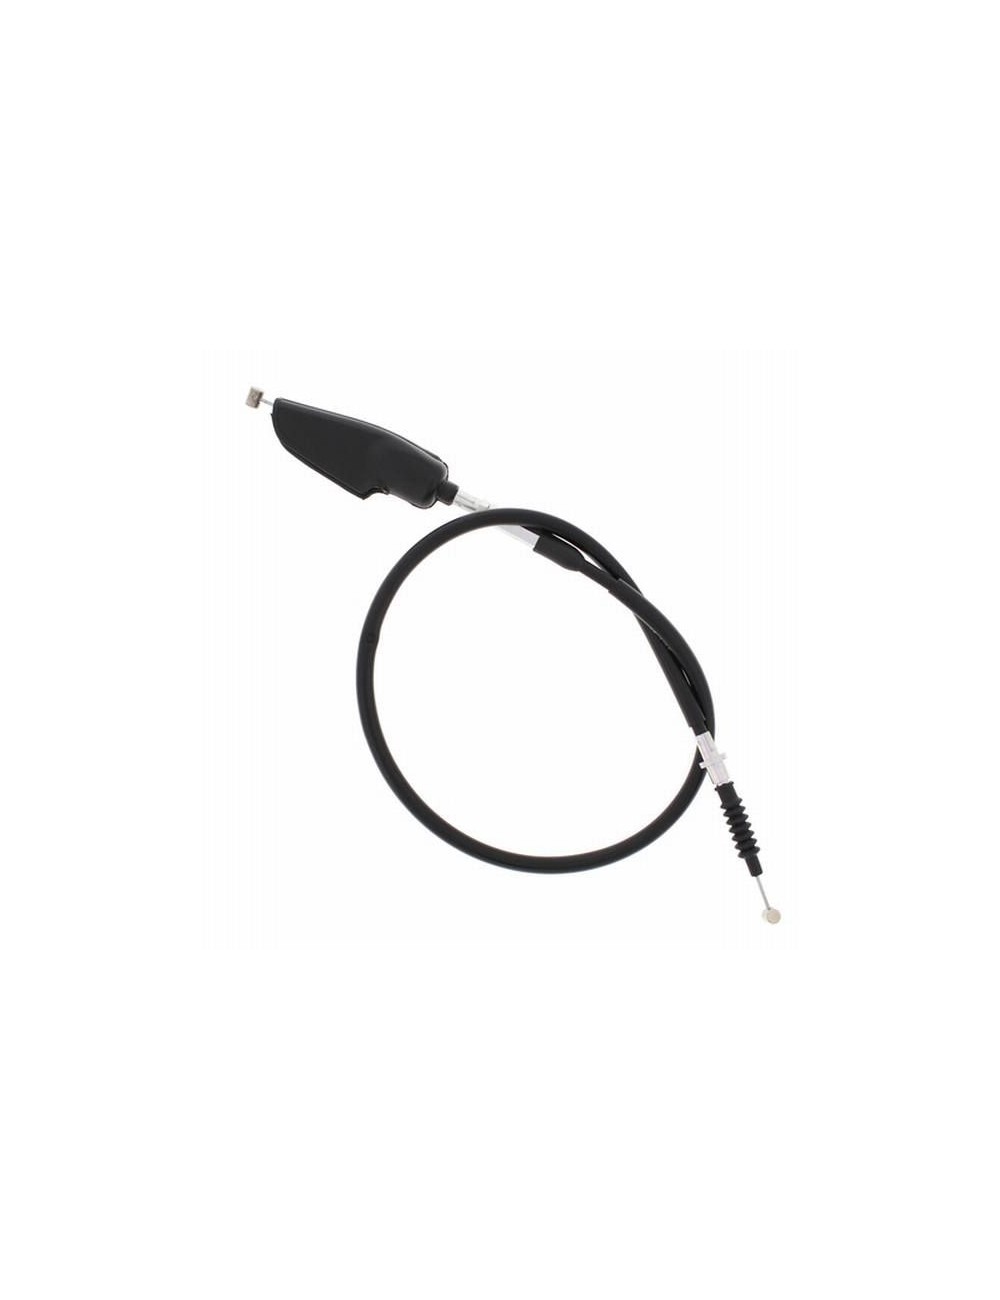 Câbles d'Embrayage pour Off Road All Balls Cable dEmbrayage YAMAHA YZ 80 1997-1998 / YZ 85 2002-2002